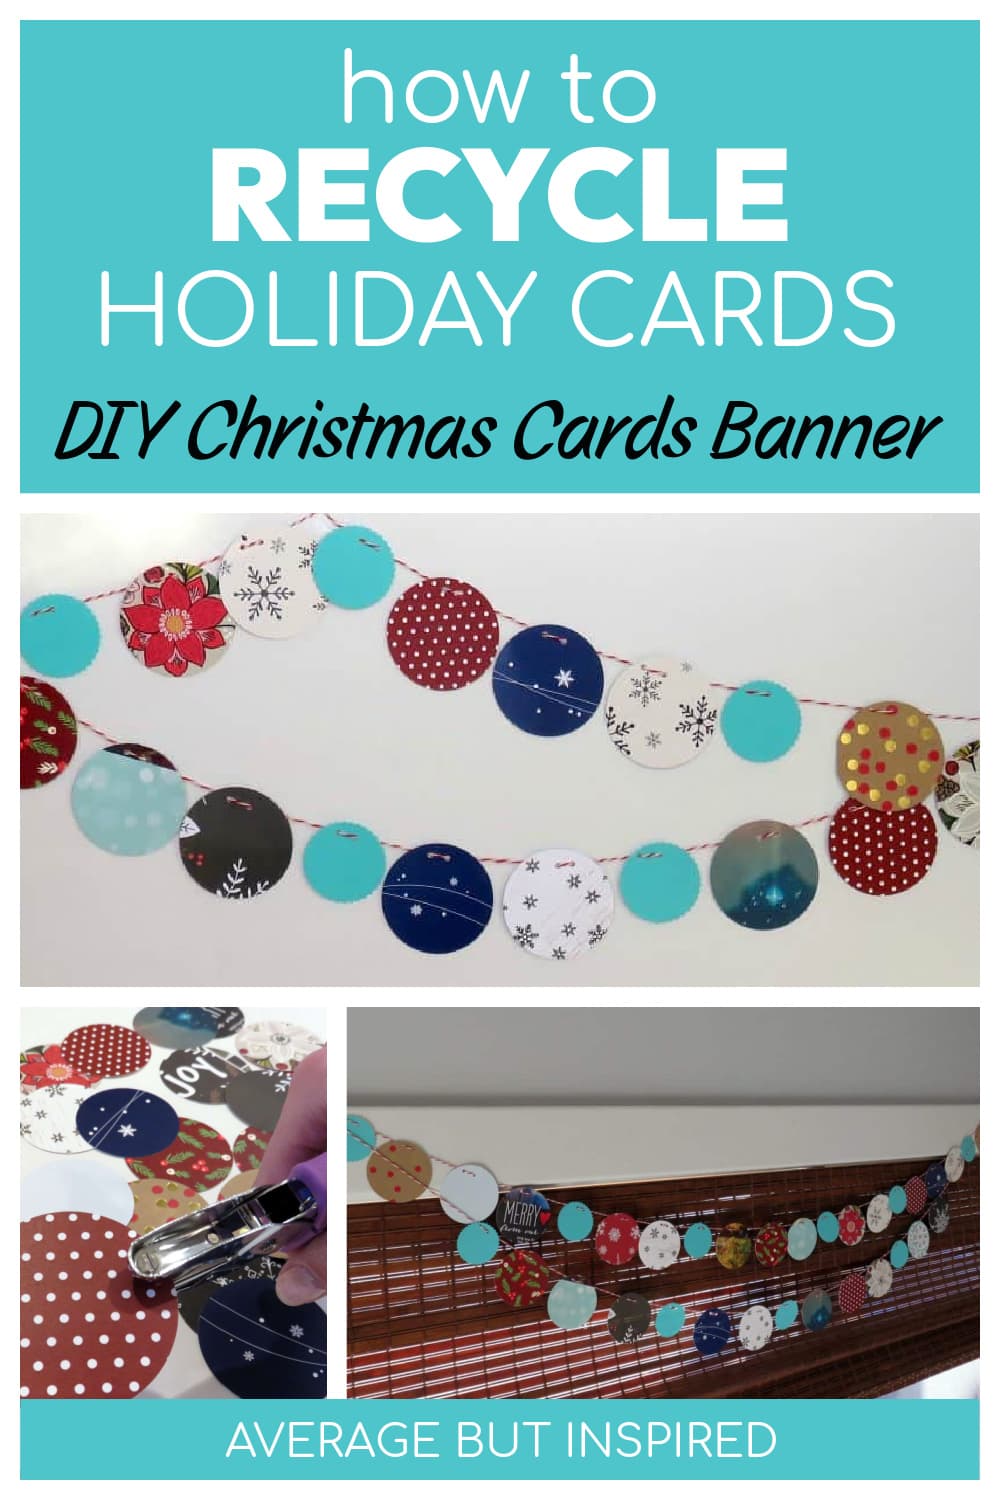 Need a way to recycle Christmas cards? Why not upcycle holiday cards into an adorable winter banner you can display all season long? This post shows you how to reuse those old holiday cards in a new way!